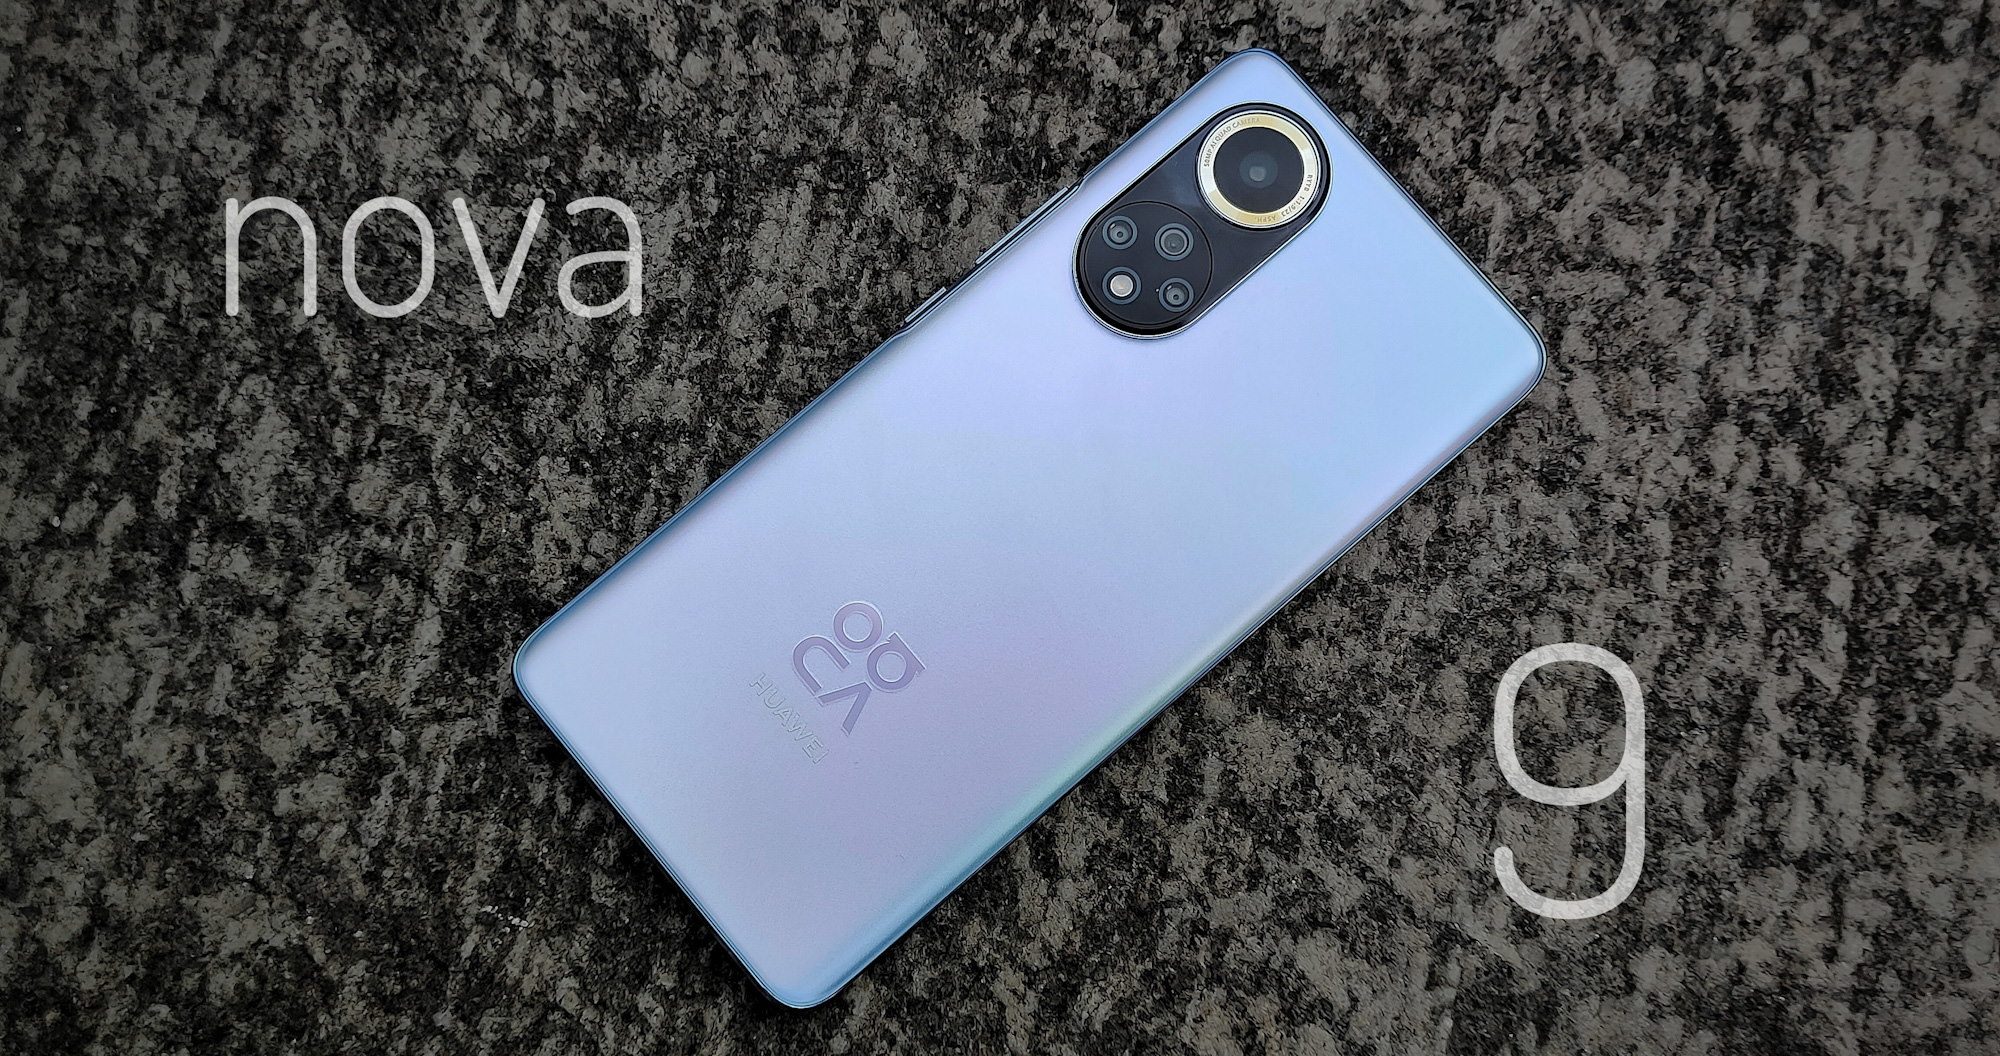 nova 9 review: Lots of light, but also shade for 500 €